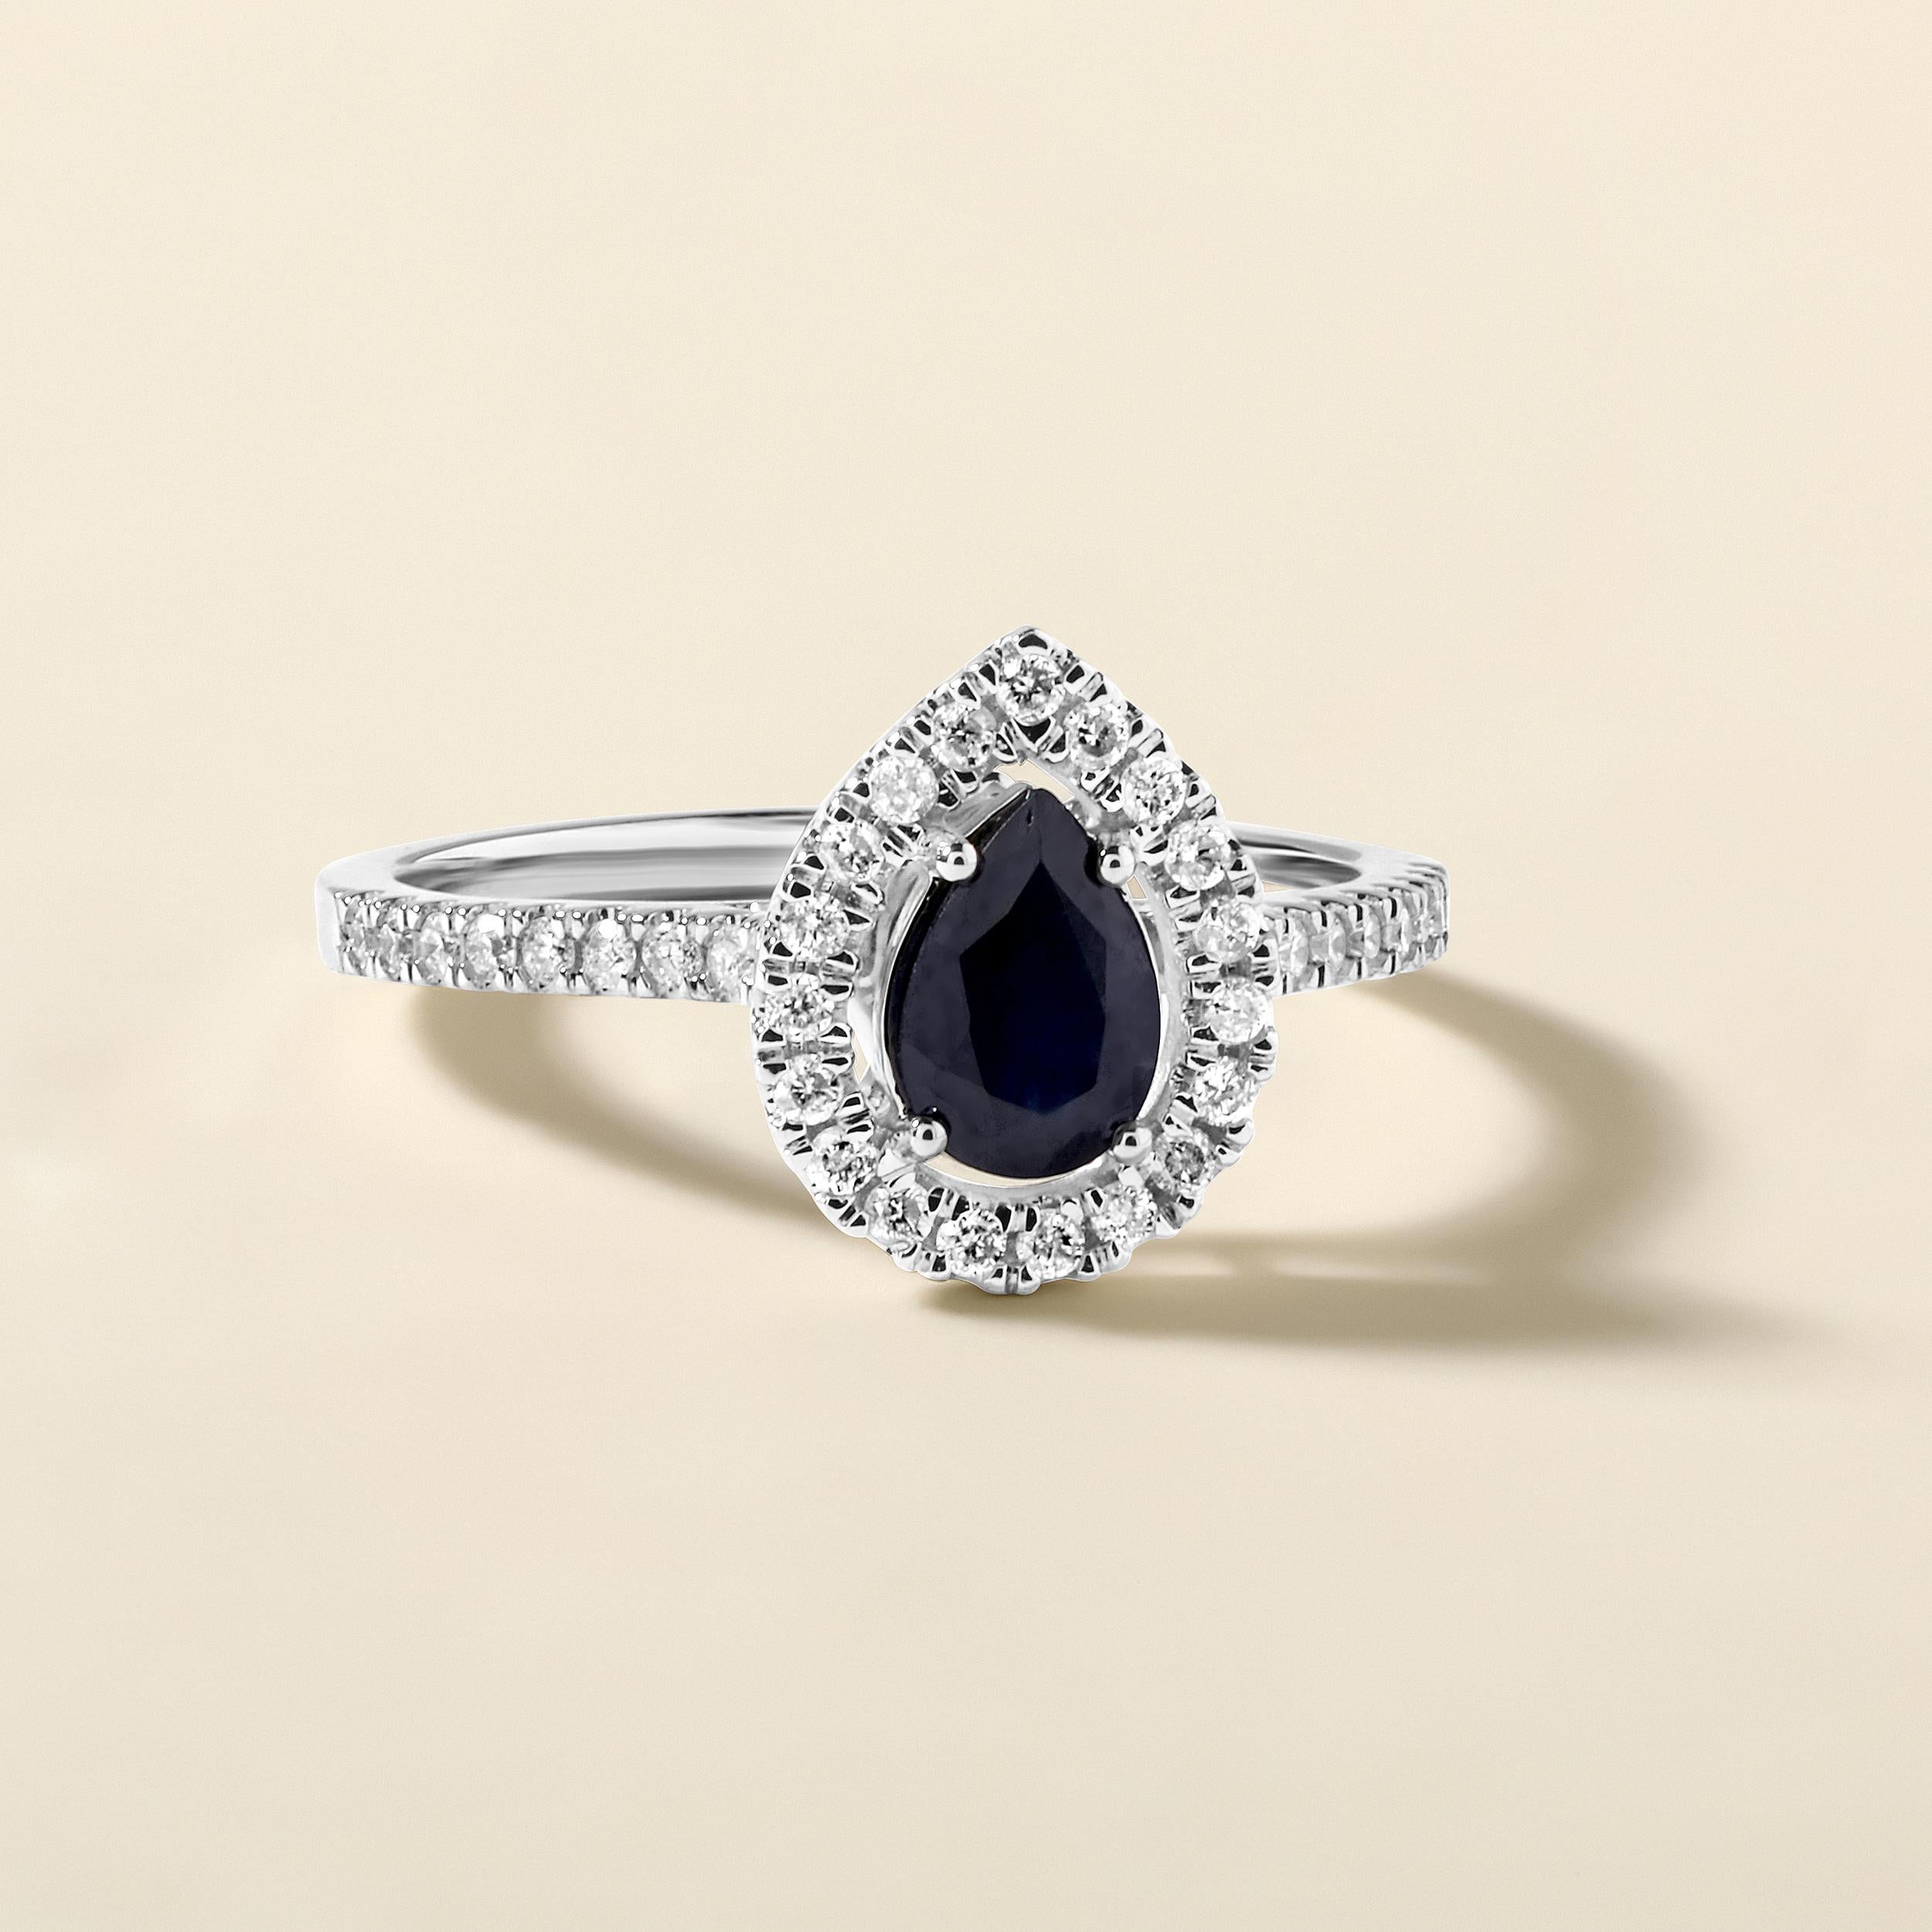 Ring Size: US 7

Crafted in 2.52 grams of 14K White Gold, the ring contains 35 stones of Round Natural Diamonds with a total of 0.28 carat in G-H color and I1-I2 clarity combined with 1 stone of Pear Shaped Natural Sapphire Gemstone with a total of